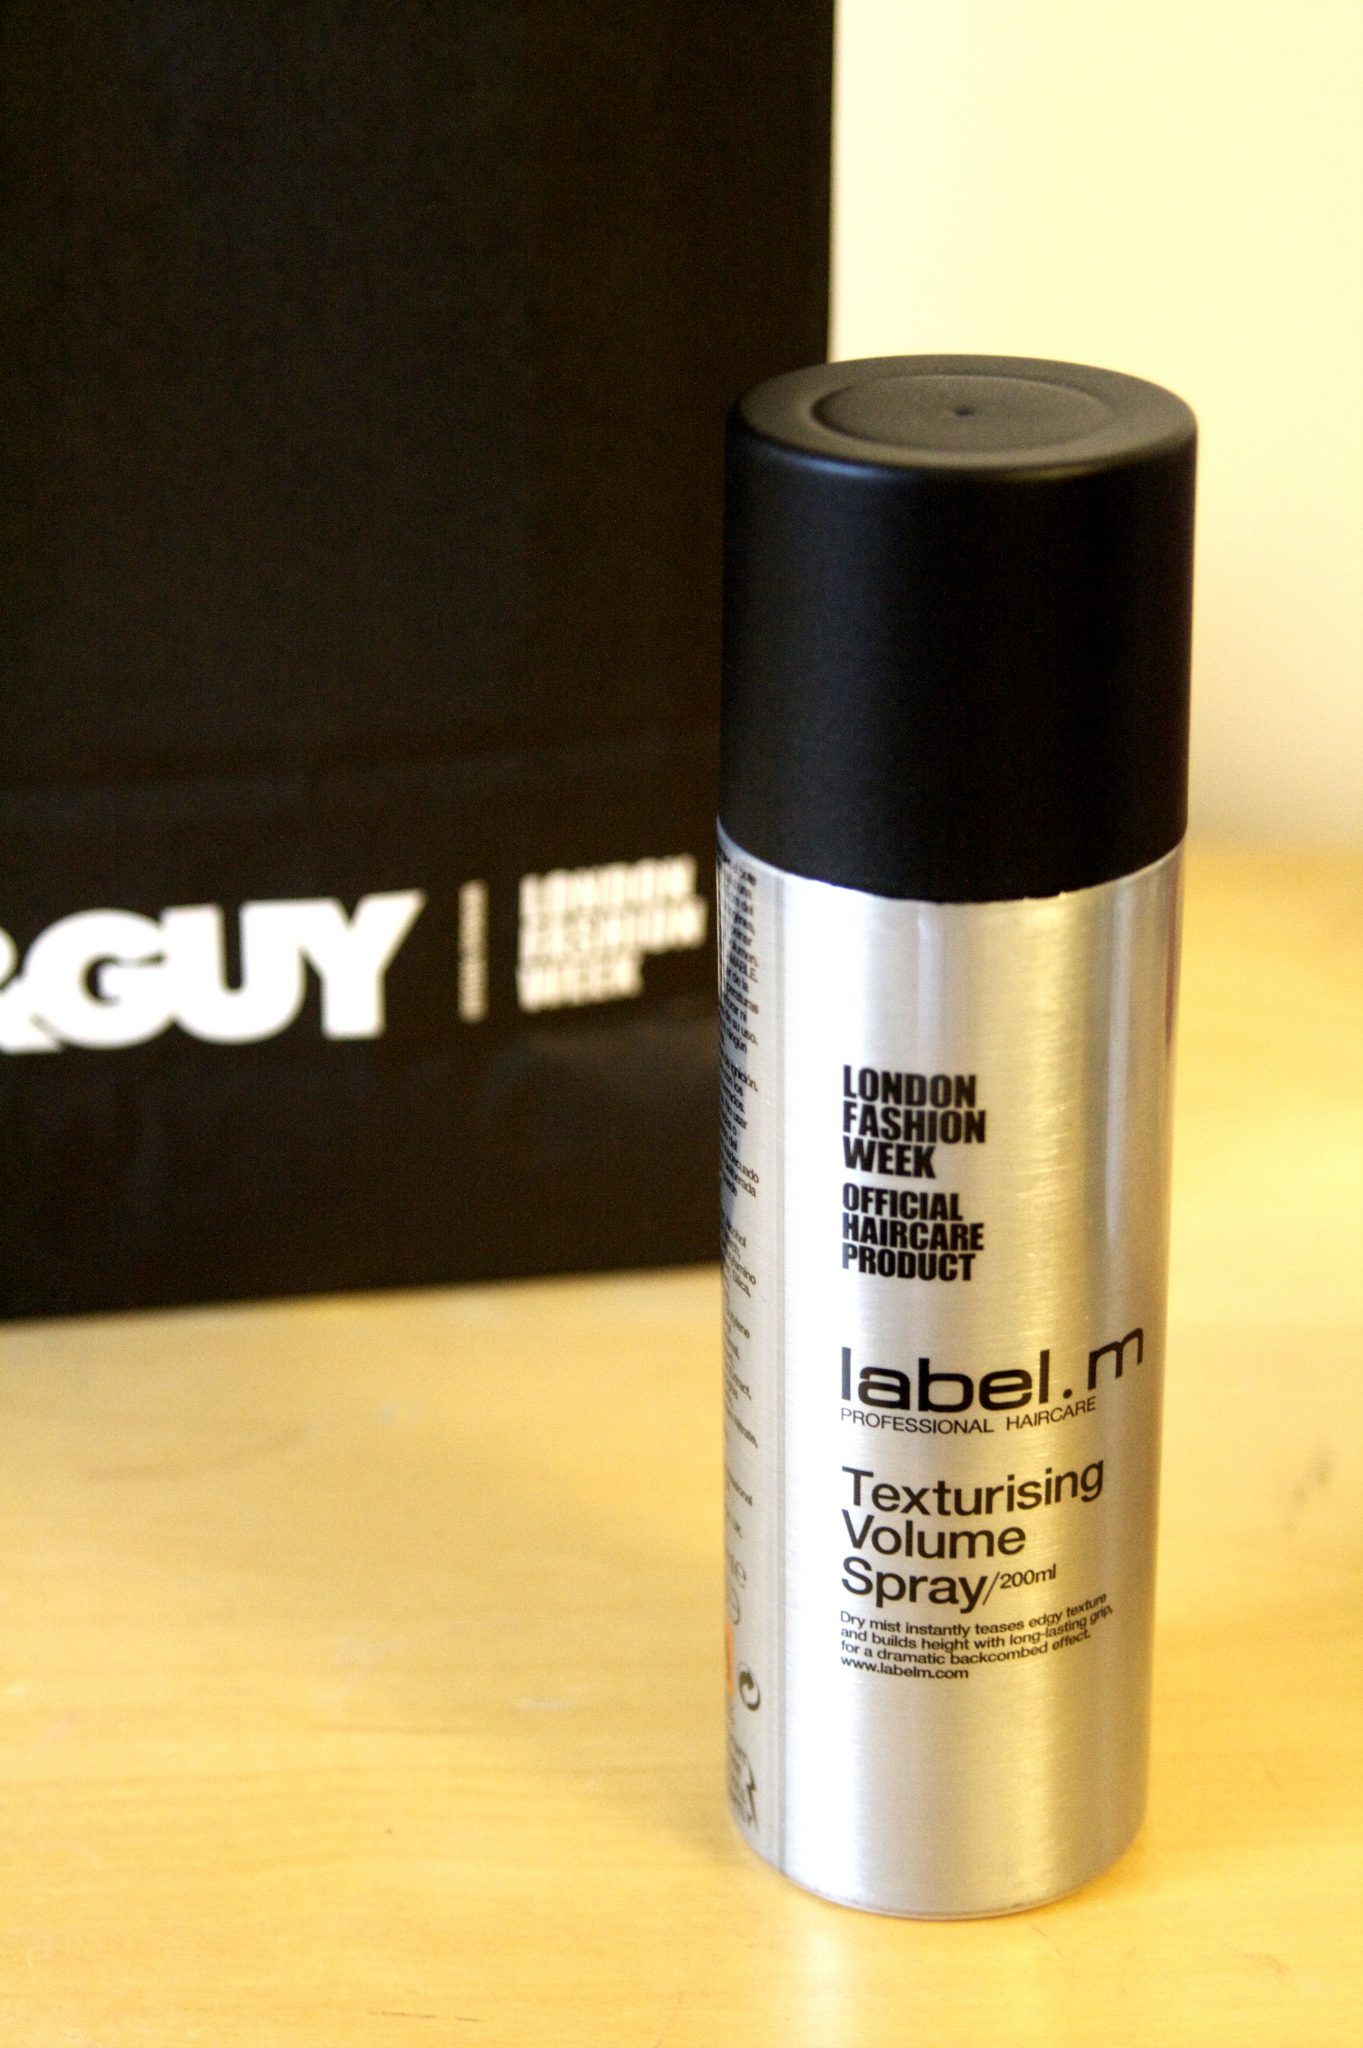 Toni and Guy Label M hair styling and hair care products. Official hair care for London Fashion Week. Volume Foam, honey and oat shampoo conditioner, hair perfume, texturising volume spray. Manchester fashion and lifestyle blog.